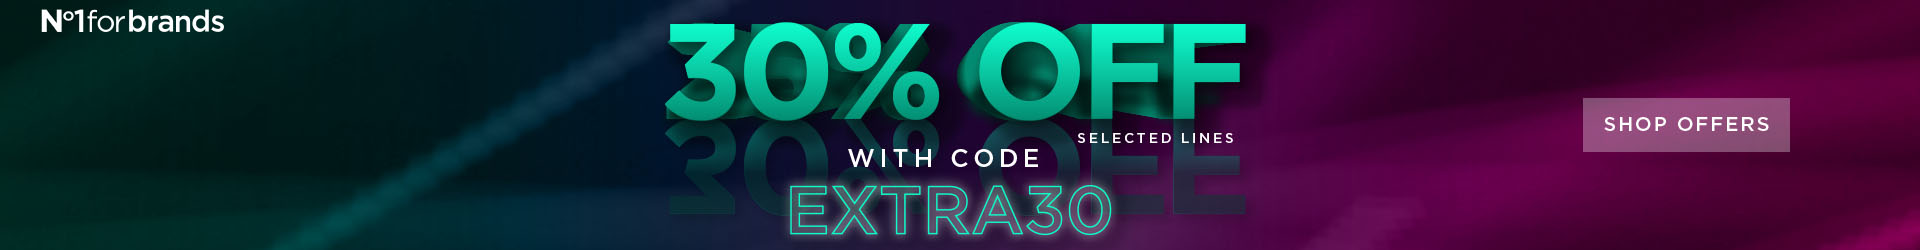 Save 30% with code EXTRA30